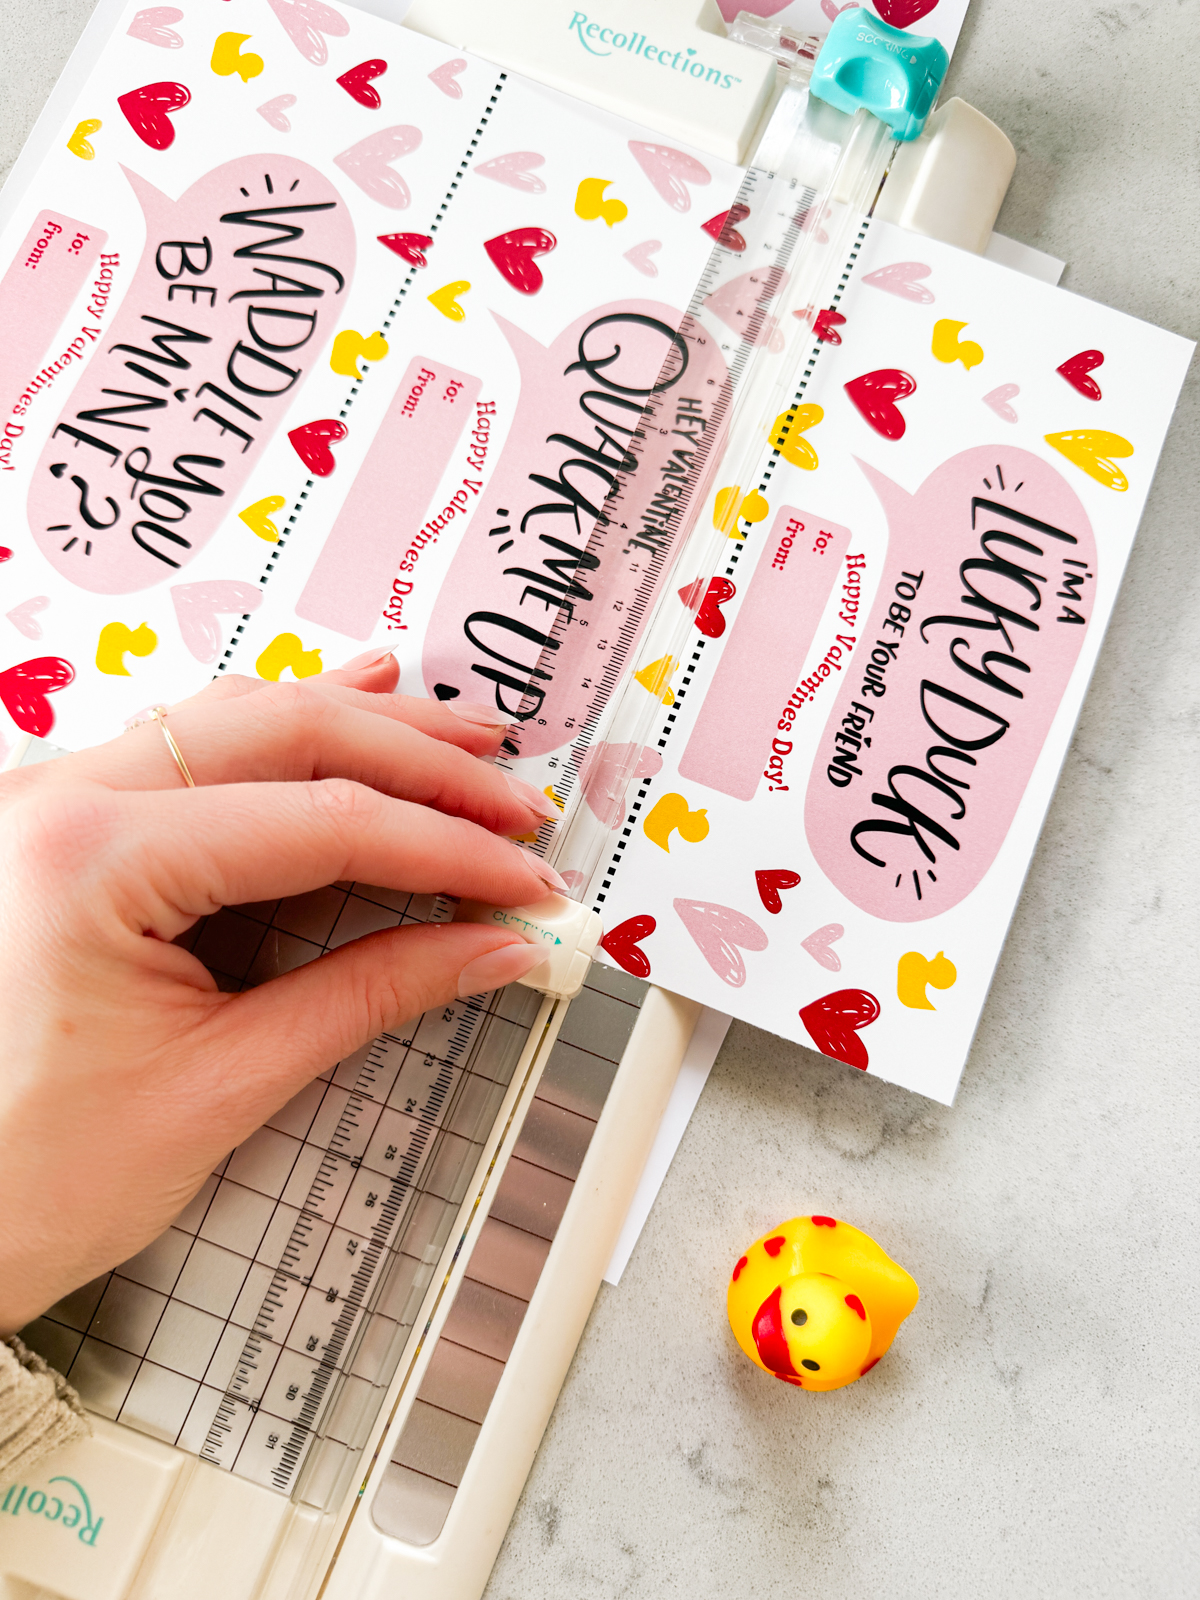 duck themed printable valentines day cards. cards shown read: waddle you be mine, hey valentine you quack me up and lucky to be your friend- all with a small happy valentines day. shown with rubber duckies, being cut to size with a paper cutter